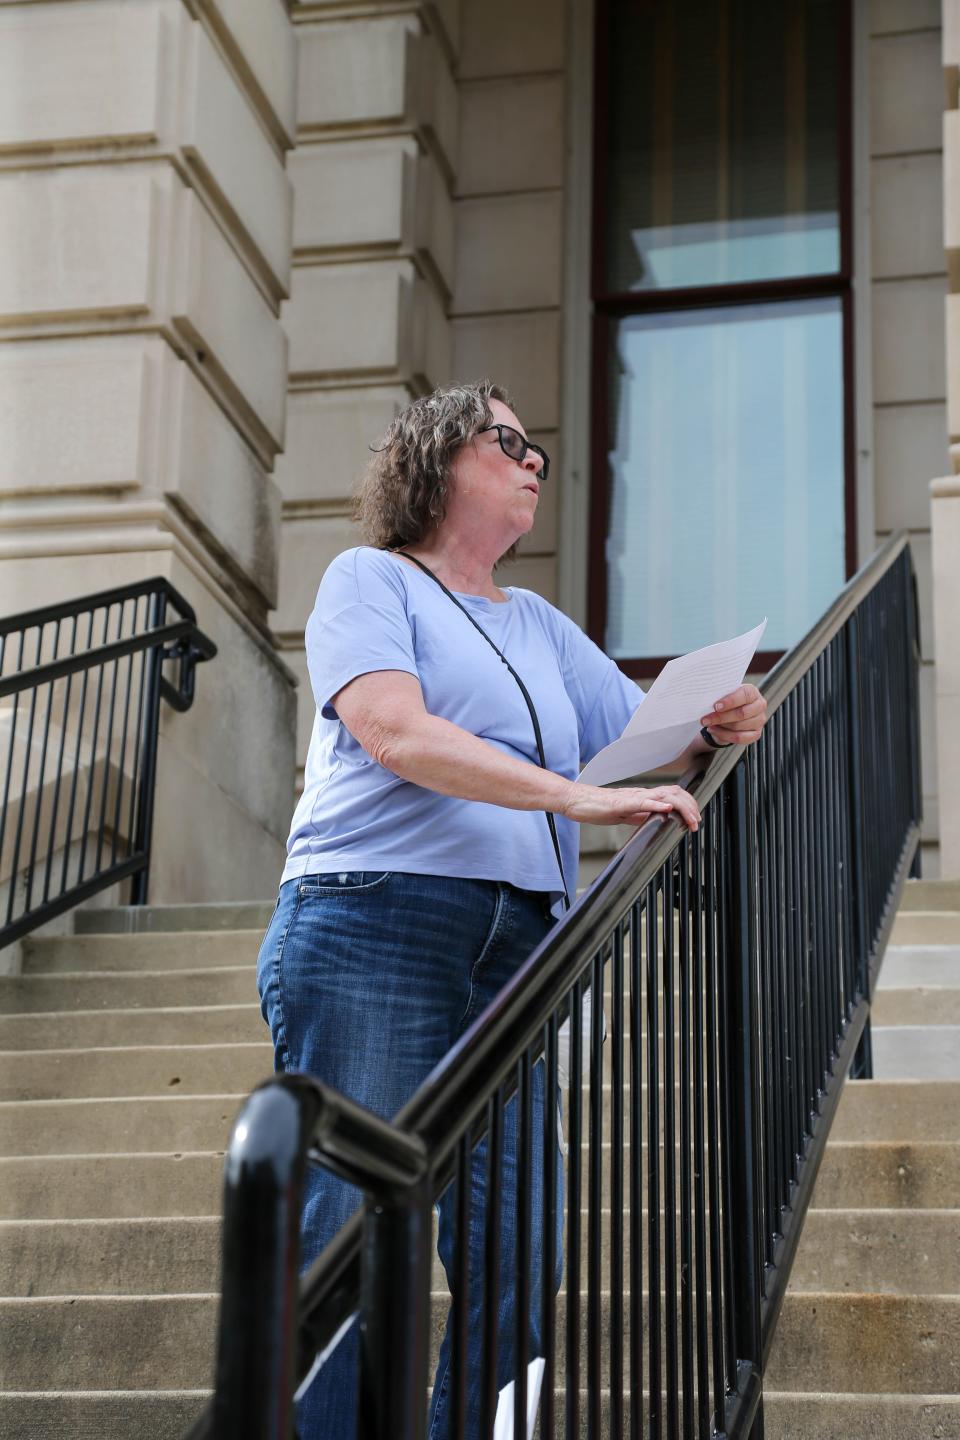 Local activist Susan Rowe speaks to more than 100 people gathered at the Tippecanoe County Courthouse in Lafayette, Ind., June 24, 2022, hours after the U.S. Supreme Court ruled 6-3 to overturn Roe v. Wade, the landmark decision that gave a woman the right to an abortion 50 years ago.